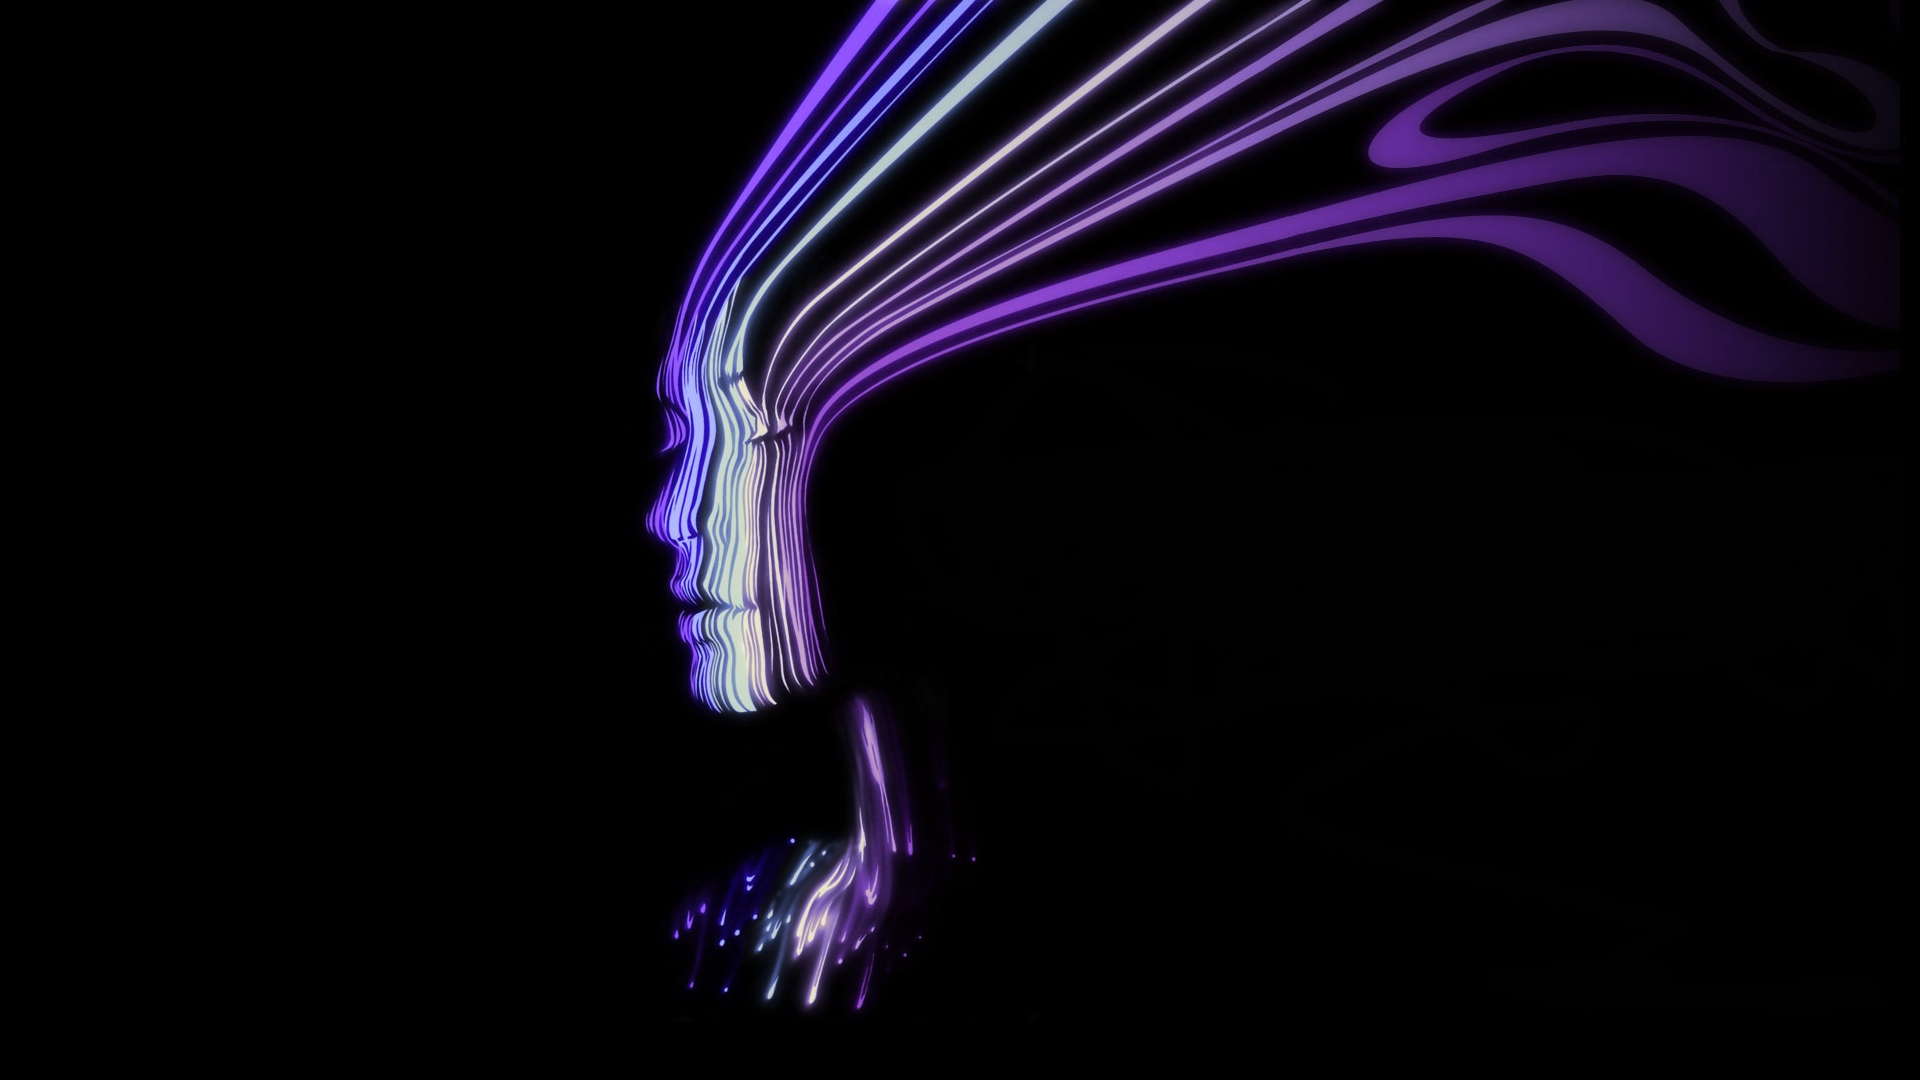 Abstract purple artwork faces black background wallpaper